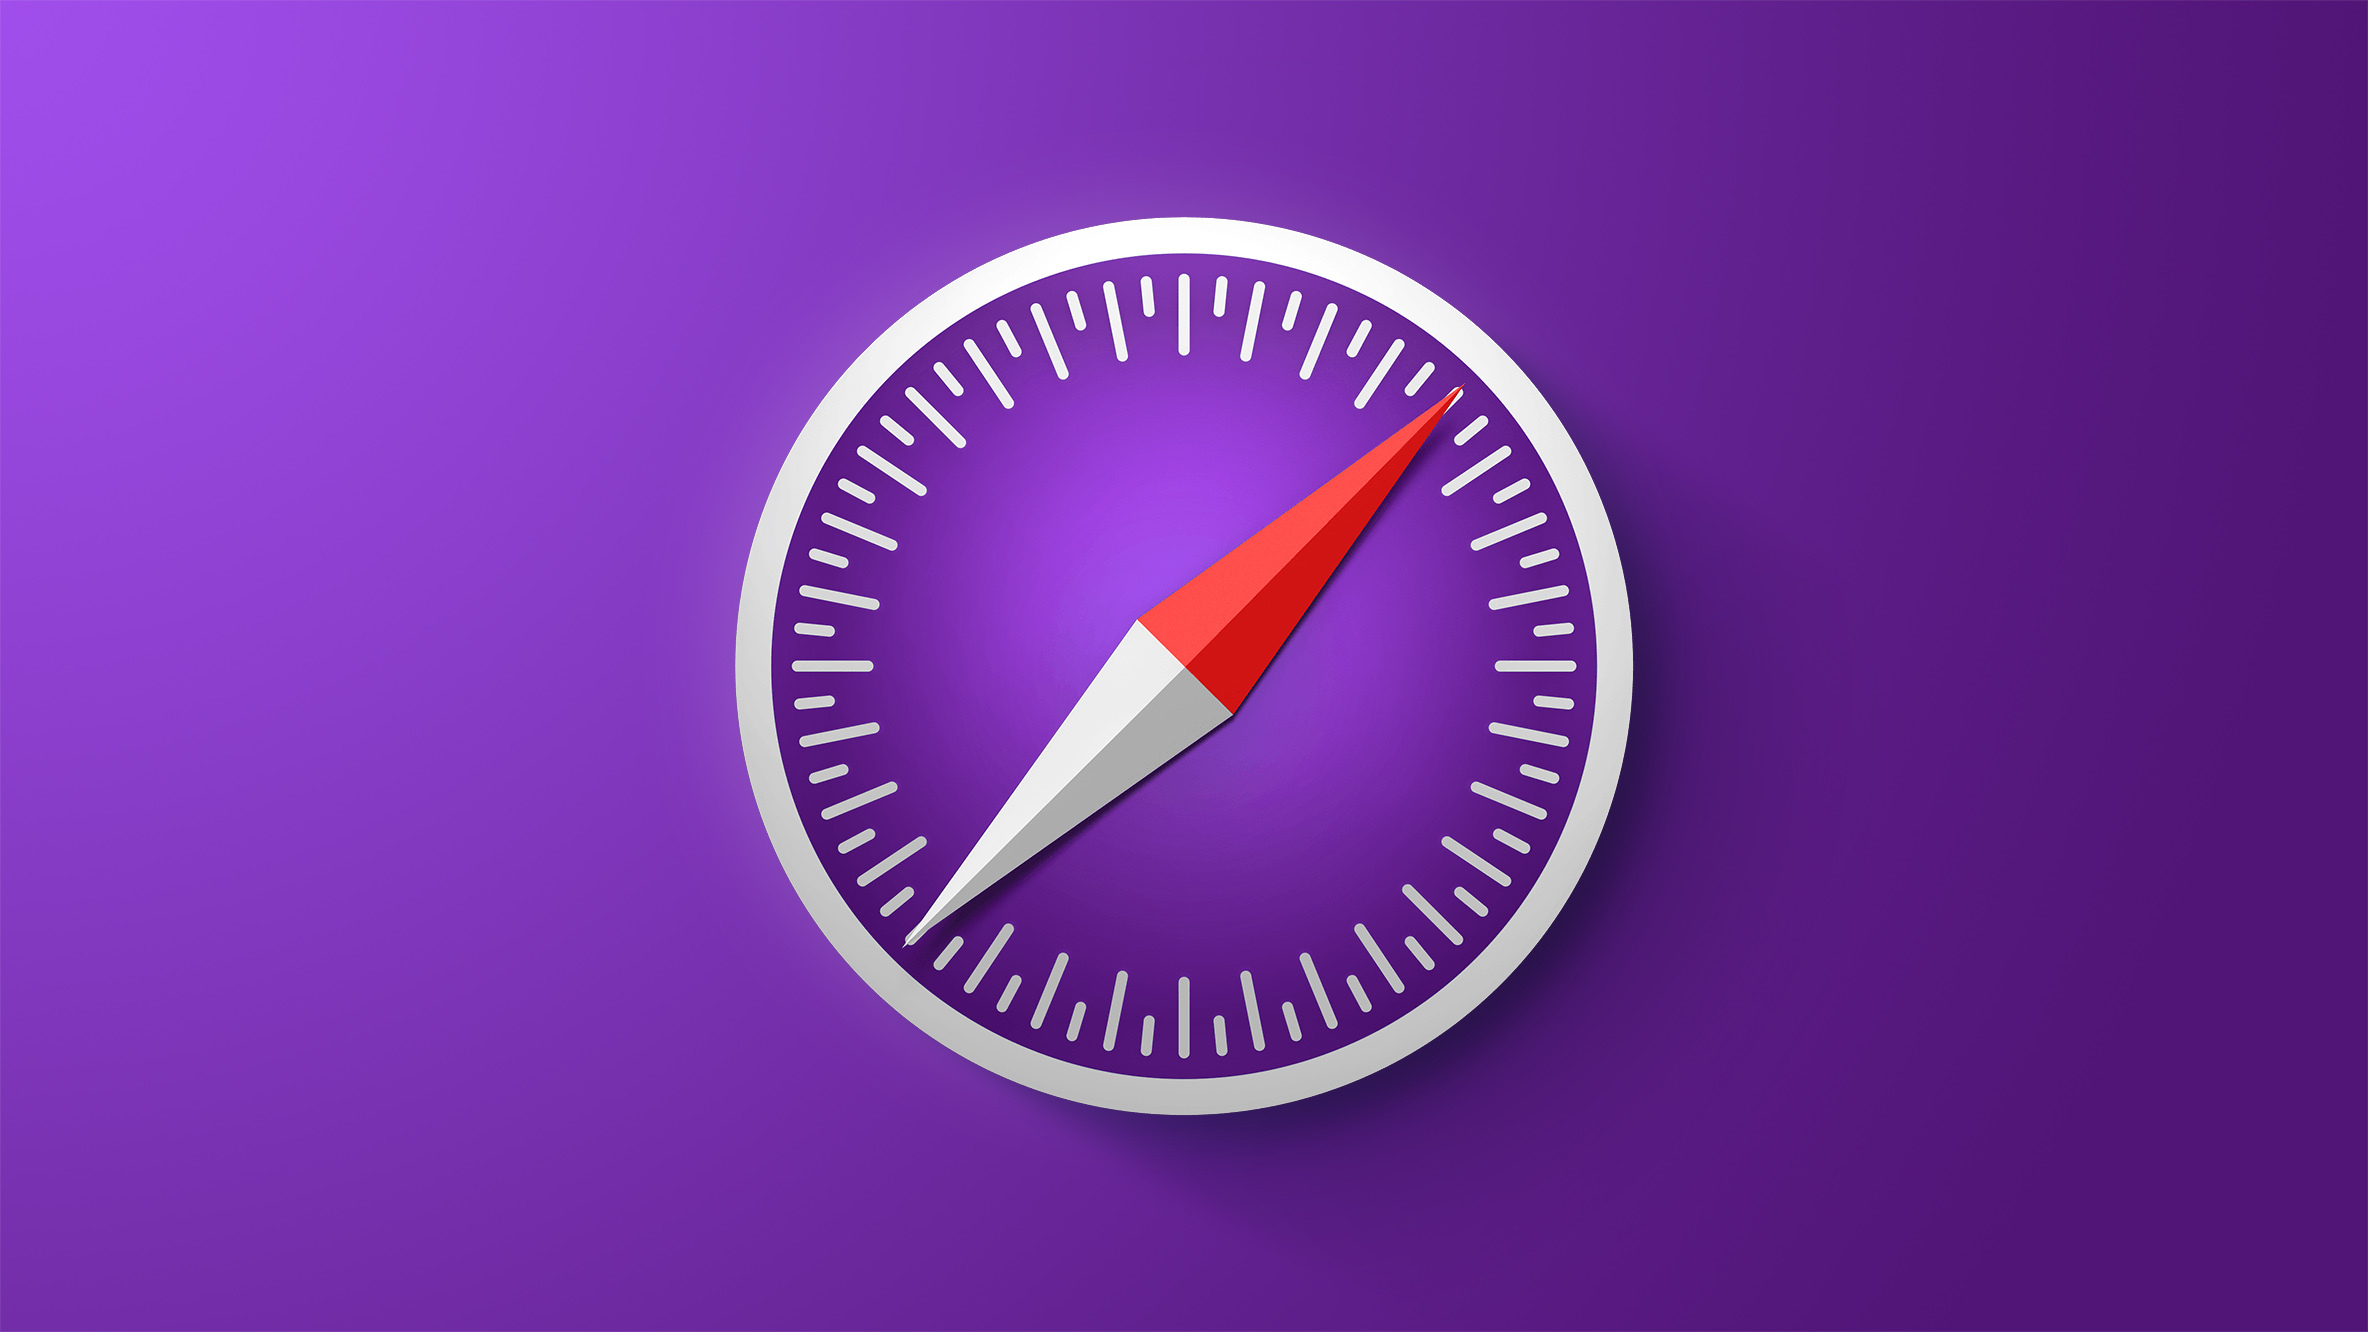 Apple Releases Safari Technology Preview 143 With Bug Fixes and Performance Improvements